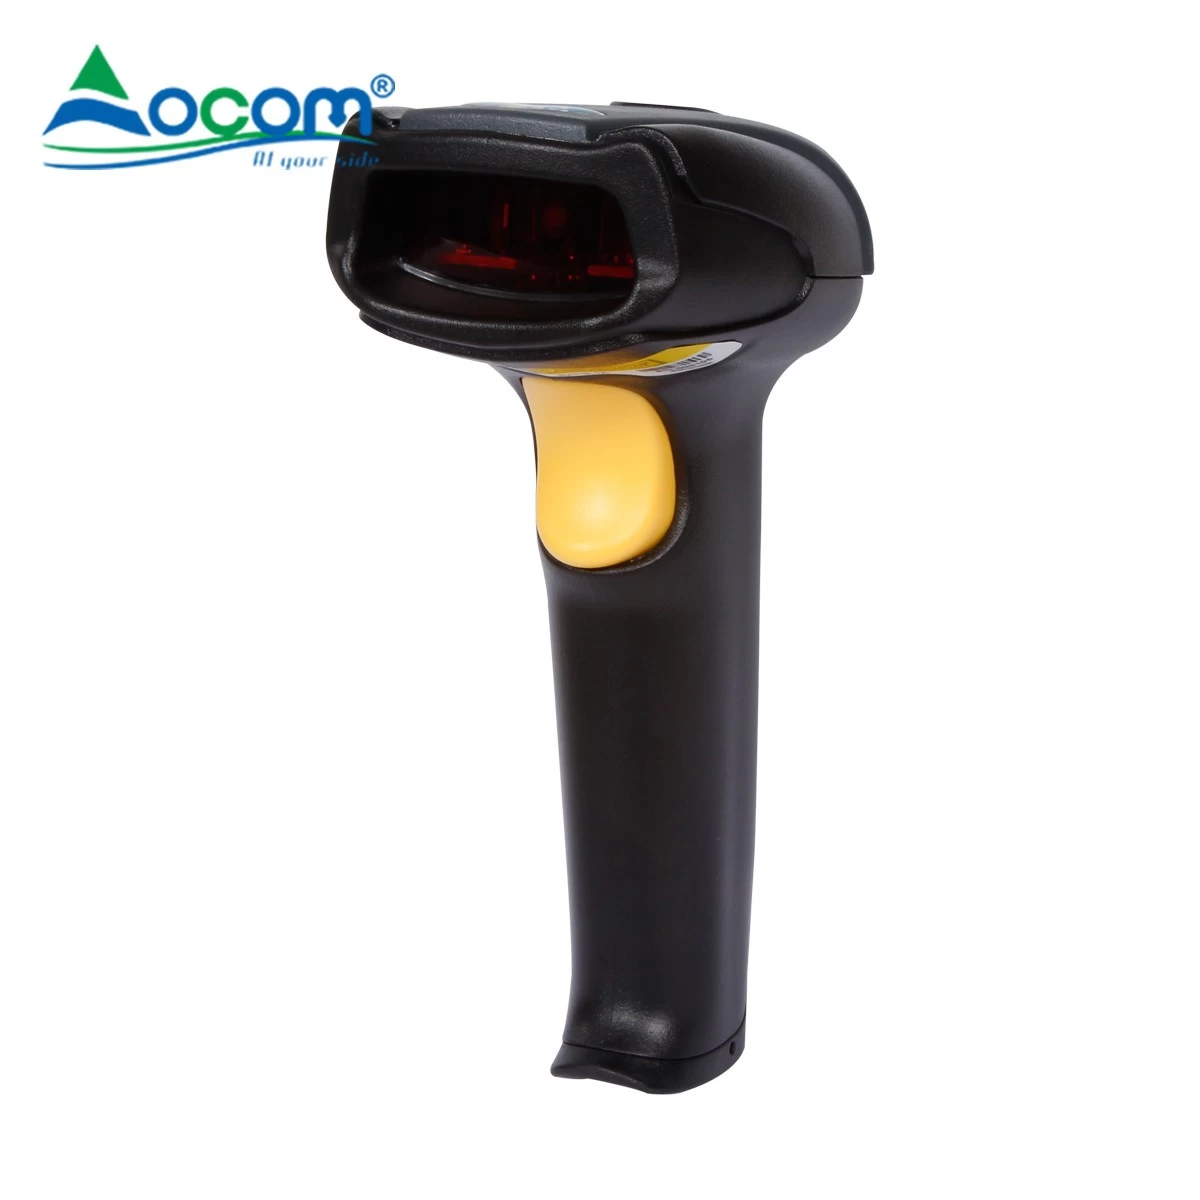 Bi-Directional Scan 32 bit CPU 260 Scan/s High Level Auto Sense Handheld Barcode Scanner With Stand